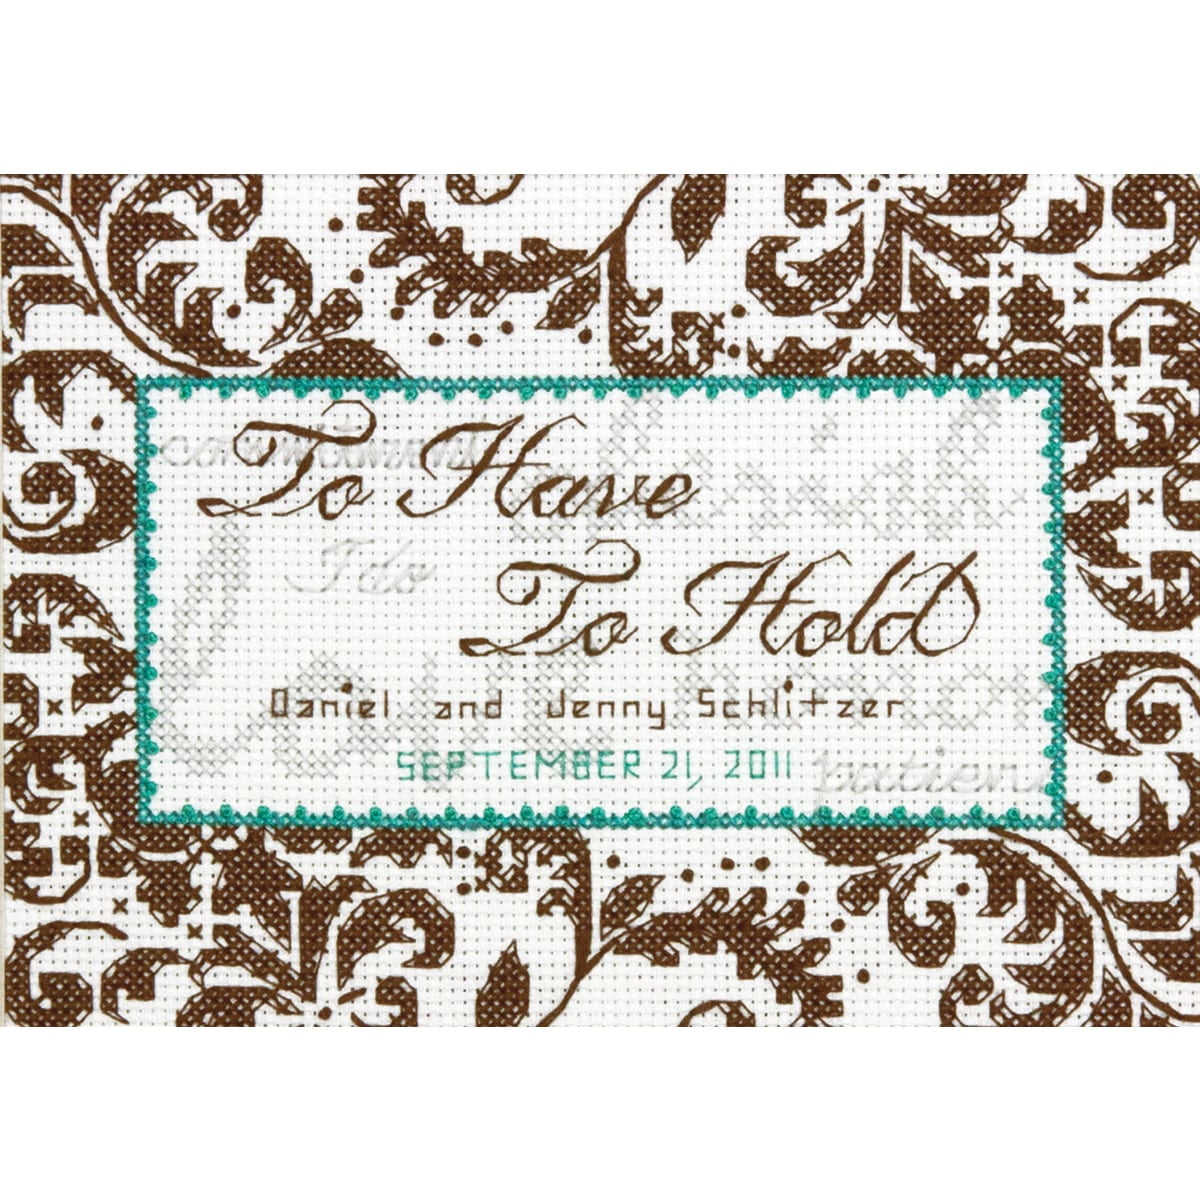 Dimensions Needlecrafts Counted Cross Stitch Treasured Words Wedding Record